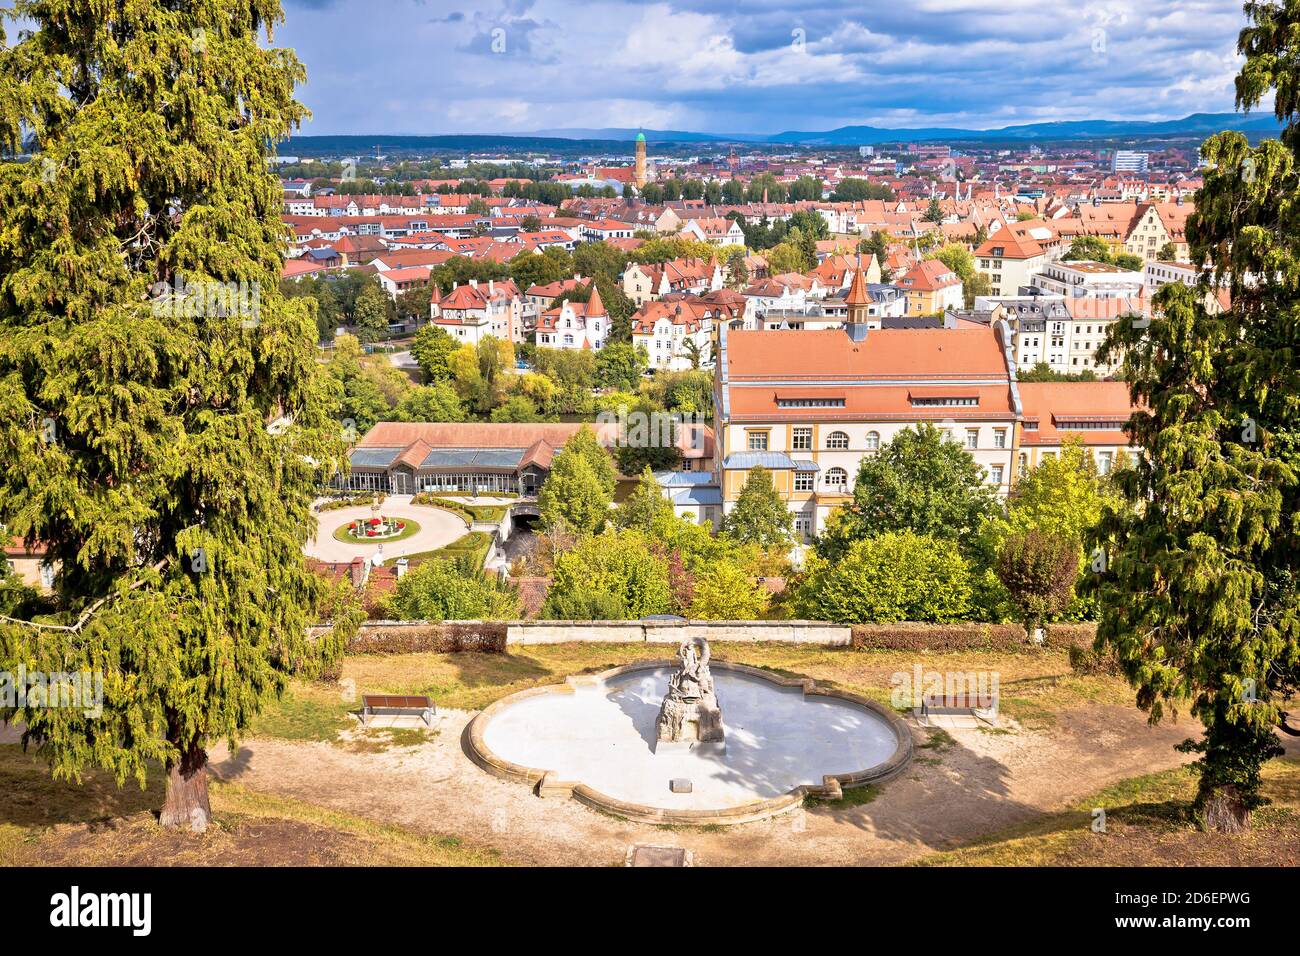 Bamberg. Panoramic view of Bamberg landscape and architecture, Upper Franconia, Bavaria region of Germany Stock Photo